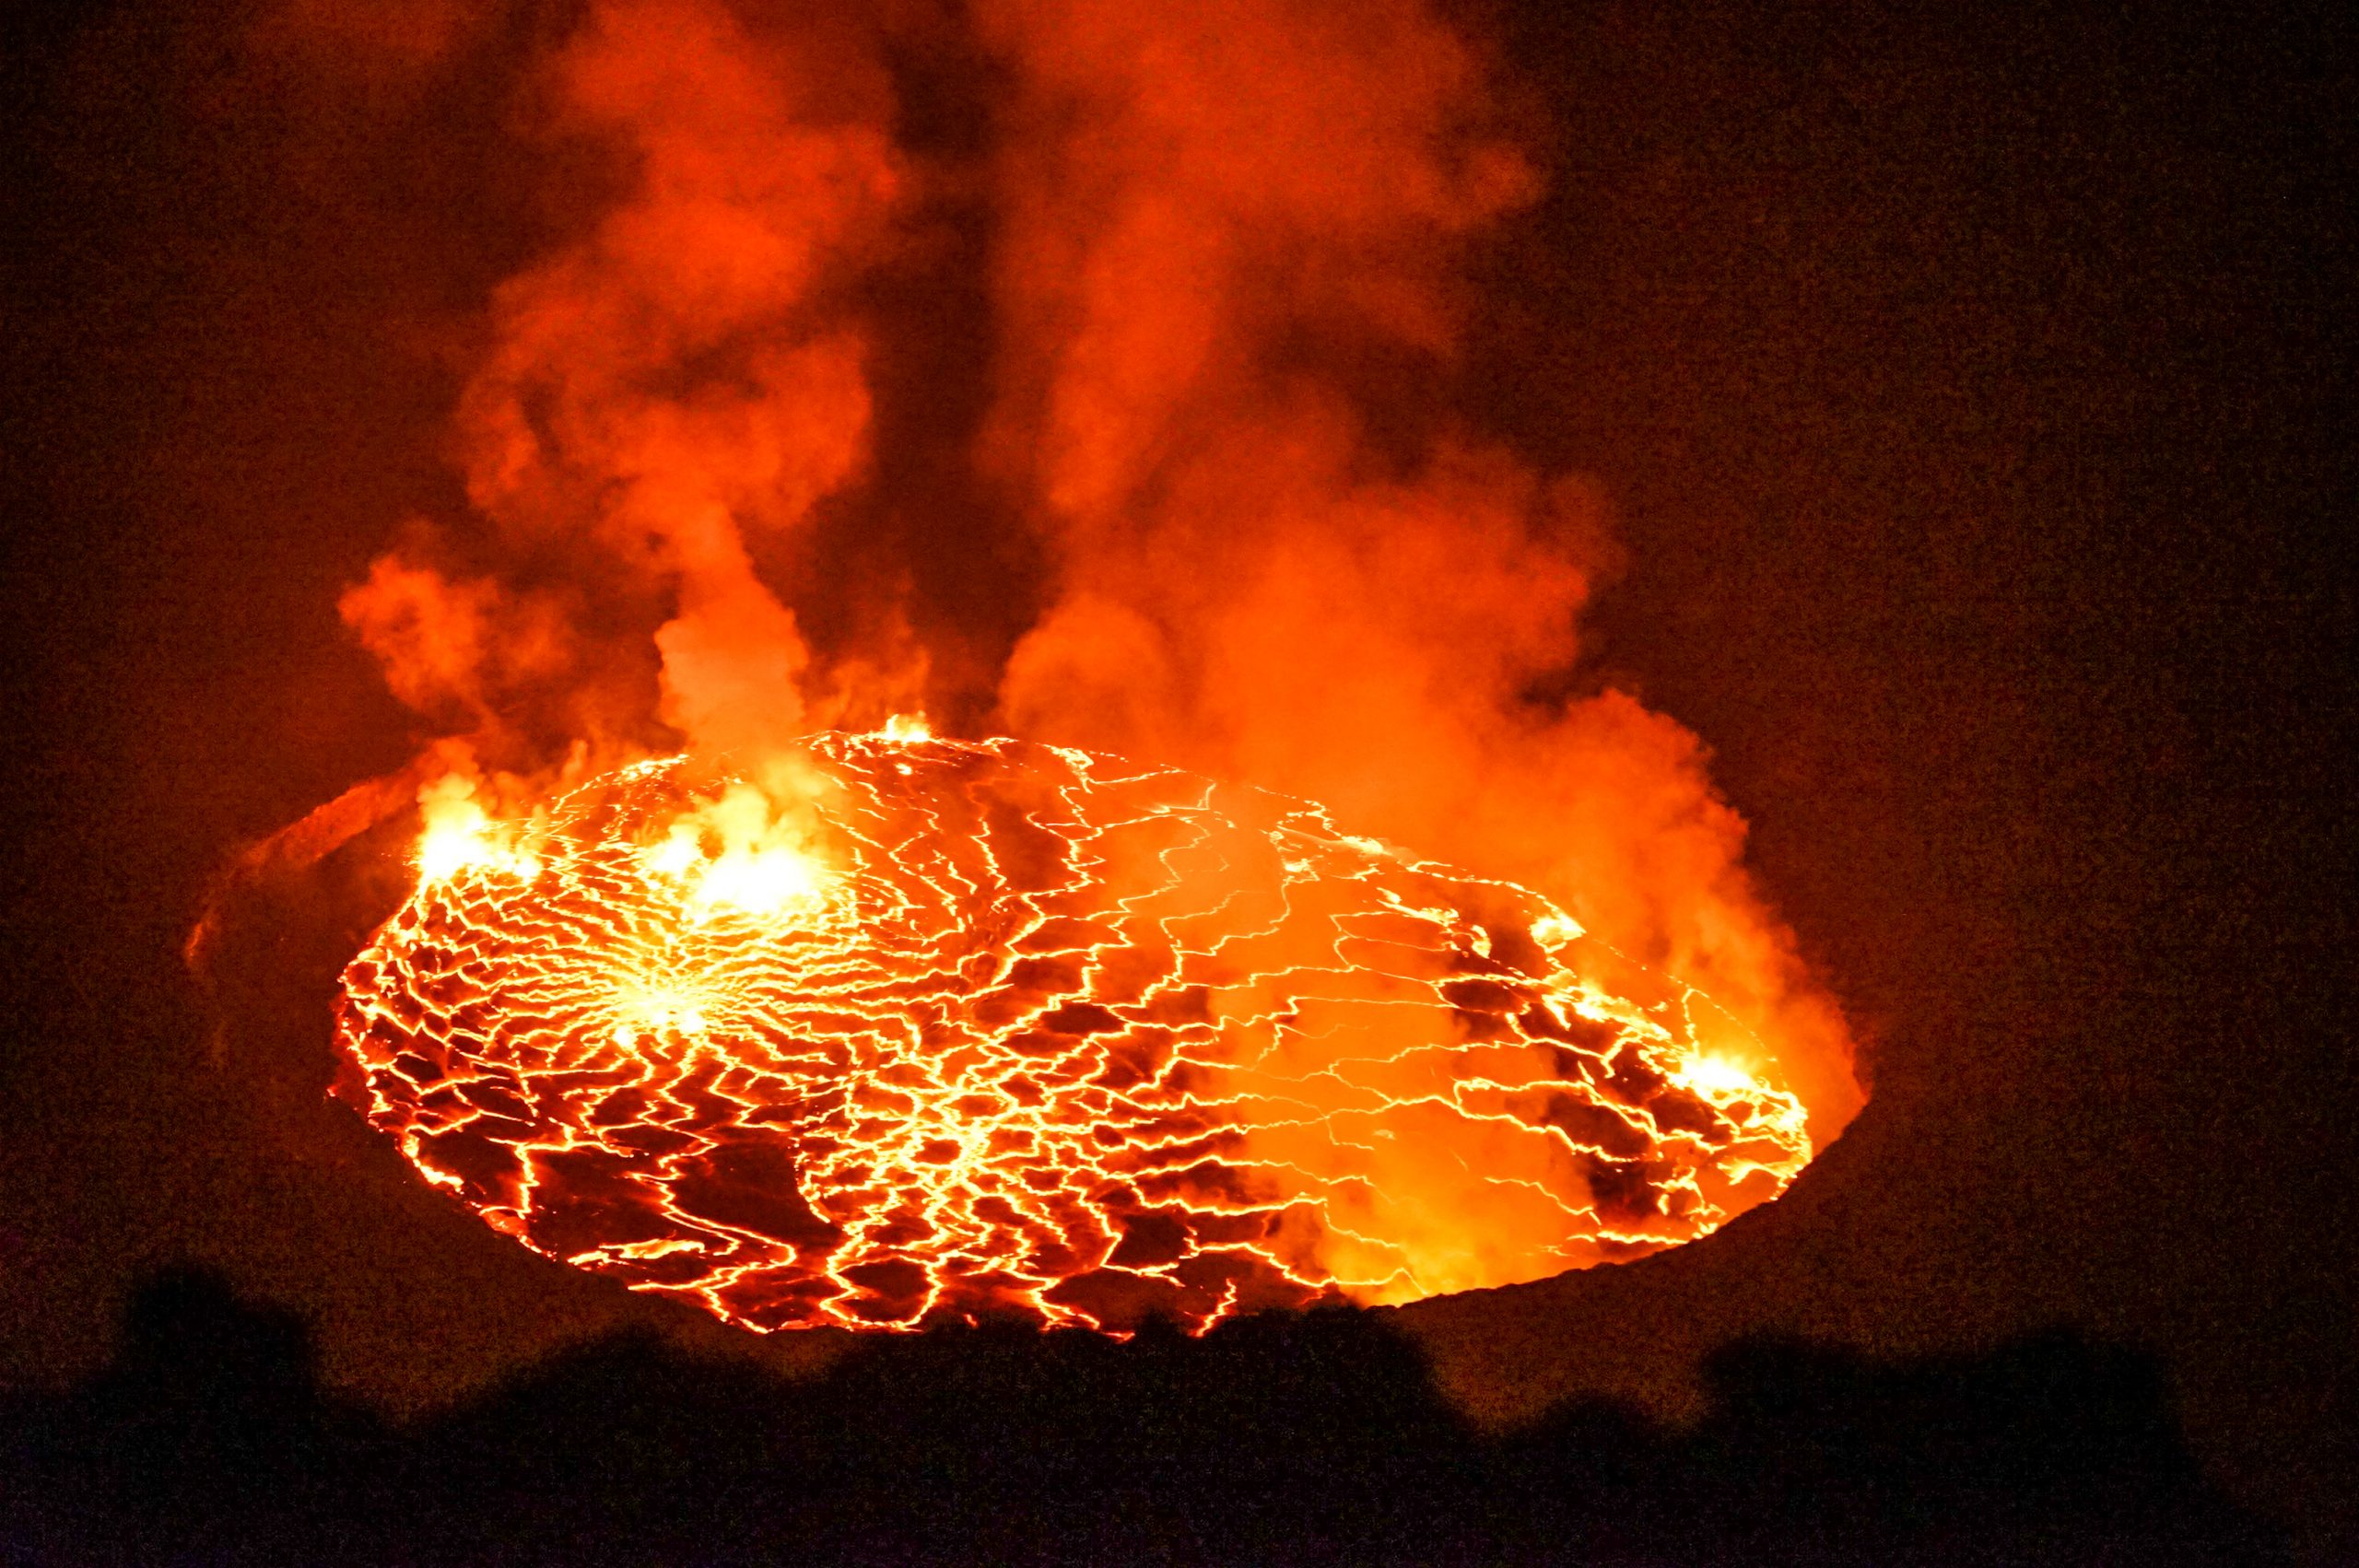 A photo of Mount Nyiragongo's glowing, smoking lava lake during the recent eruption